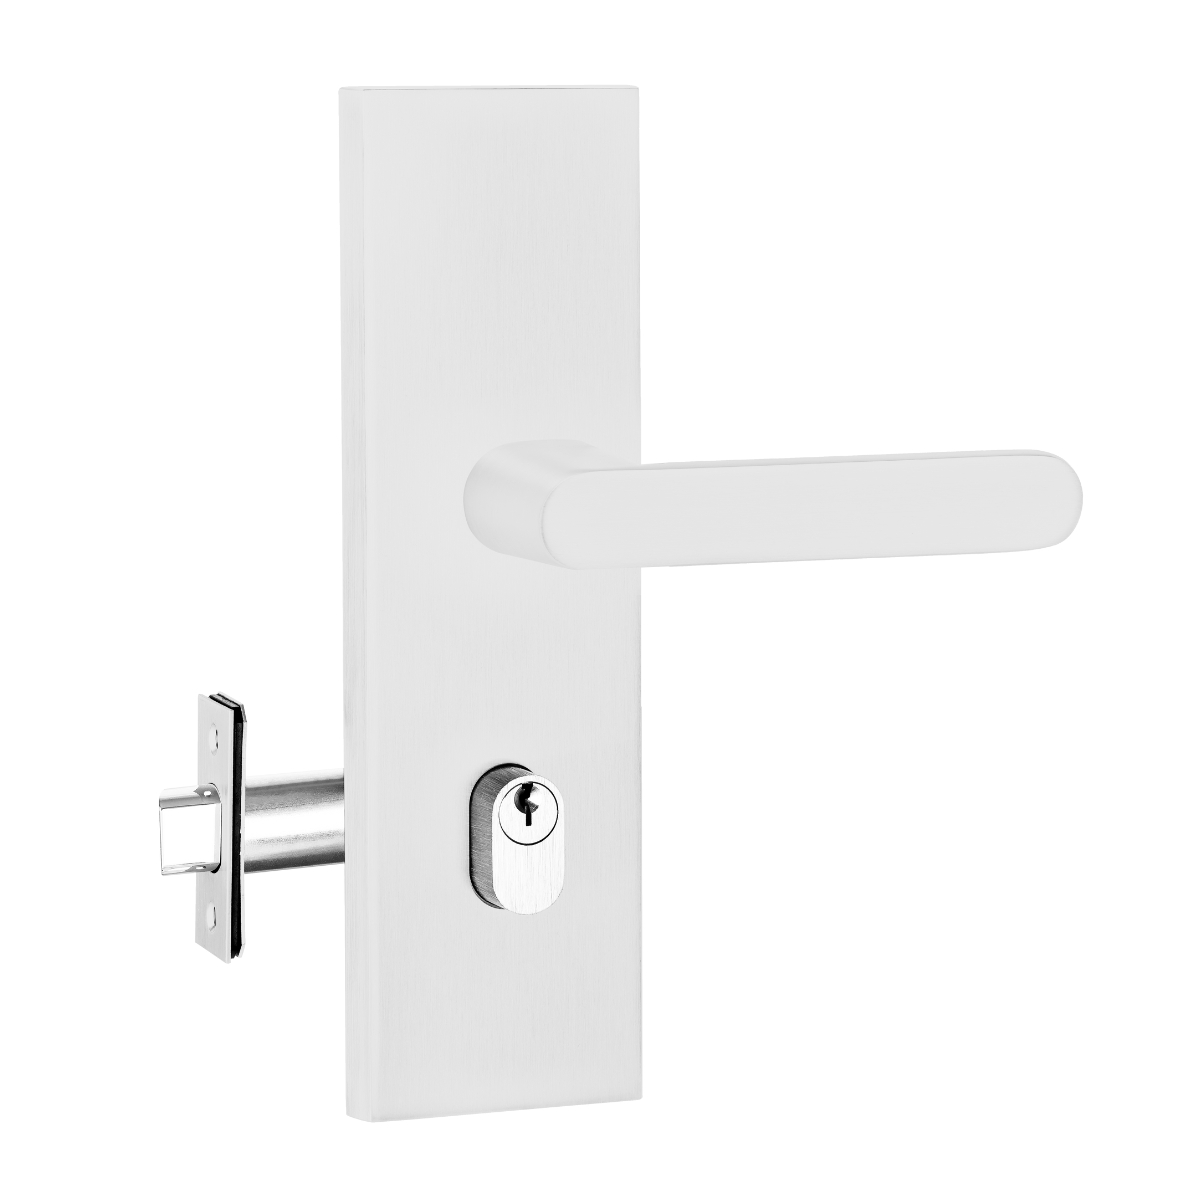 entry pro 3 white front door handle 380